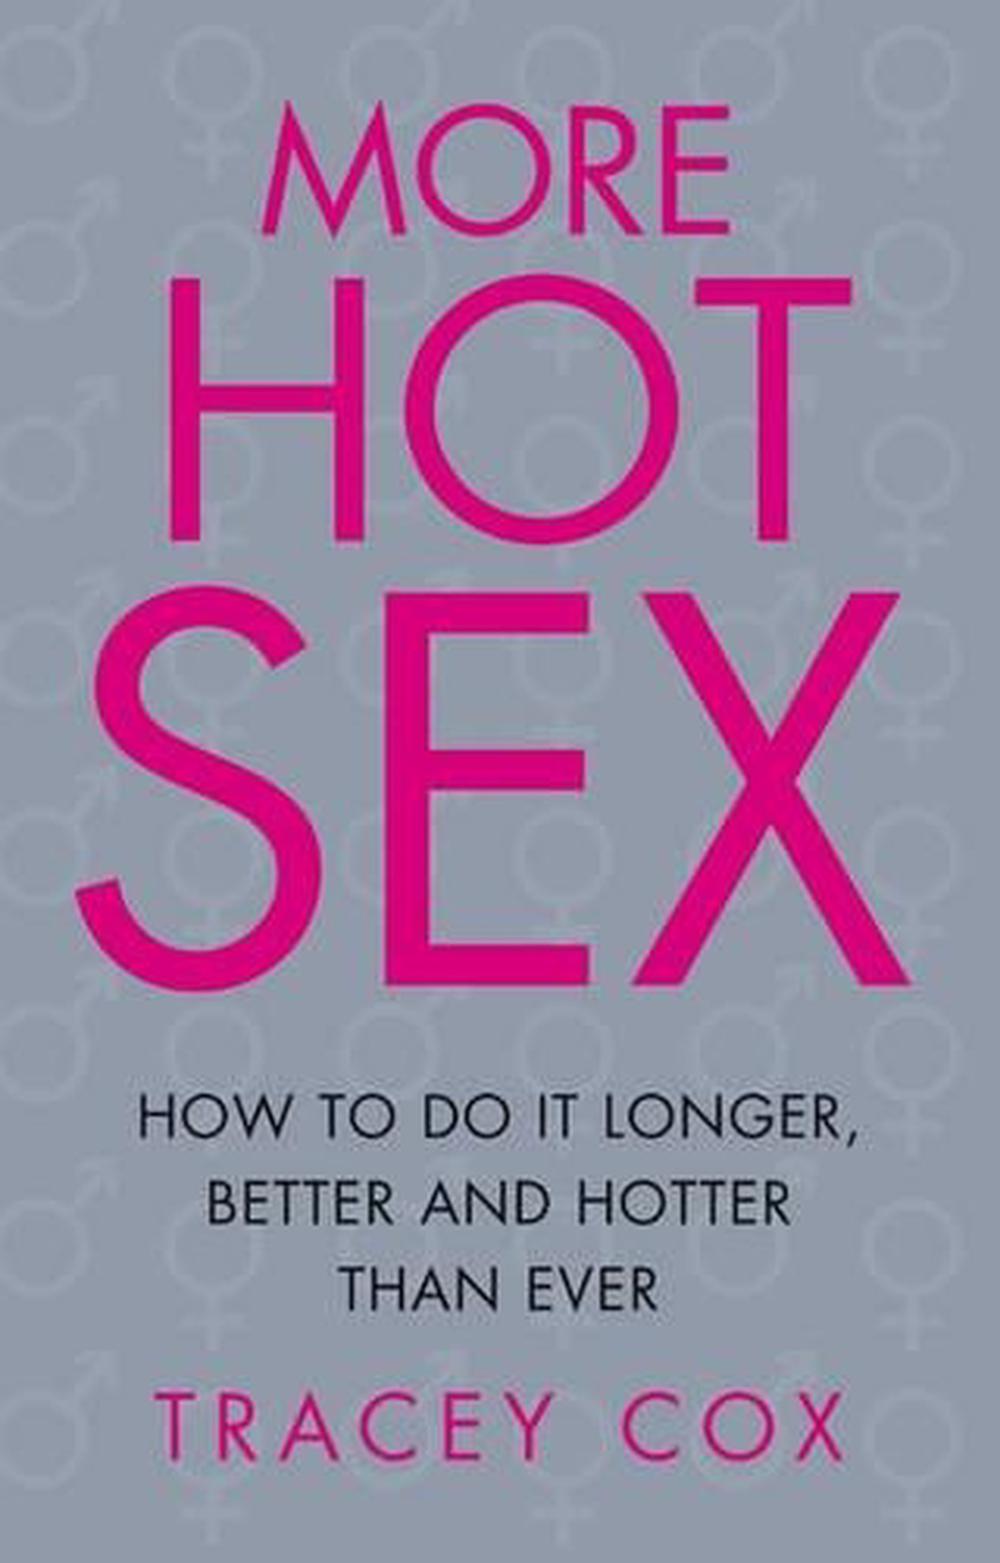 More Hot Sex By Tracey Cox Paperback 9781863255806 Buy Online At